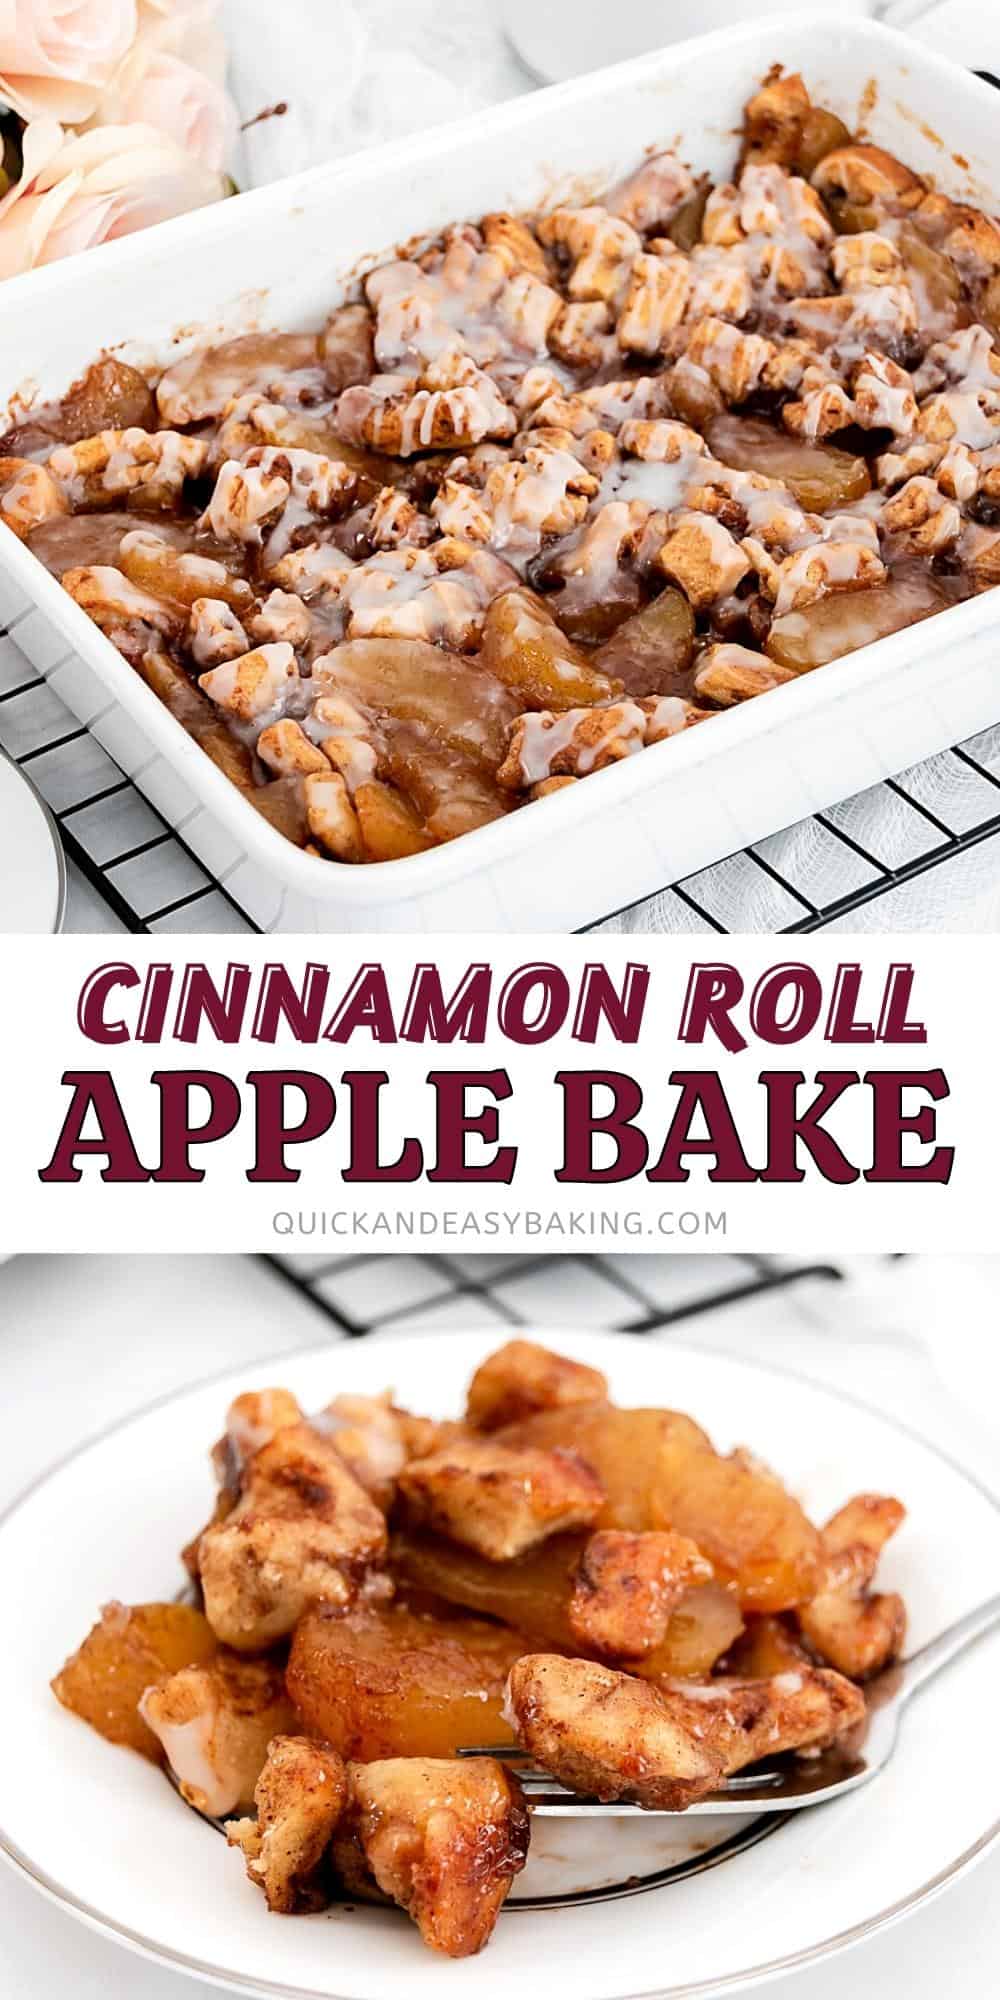 Collage of apple bake with cinnamon and text overlay.